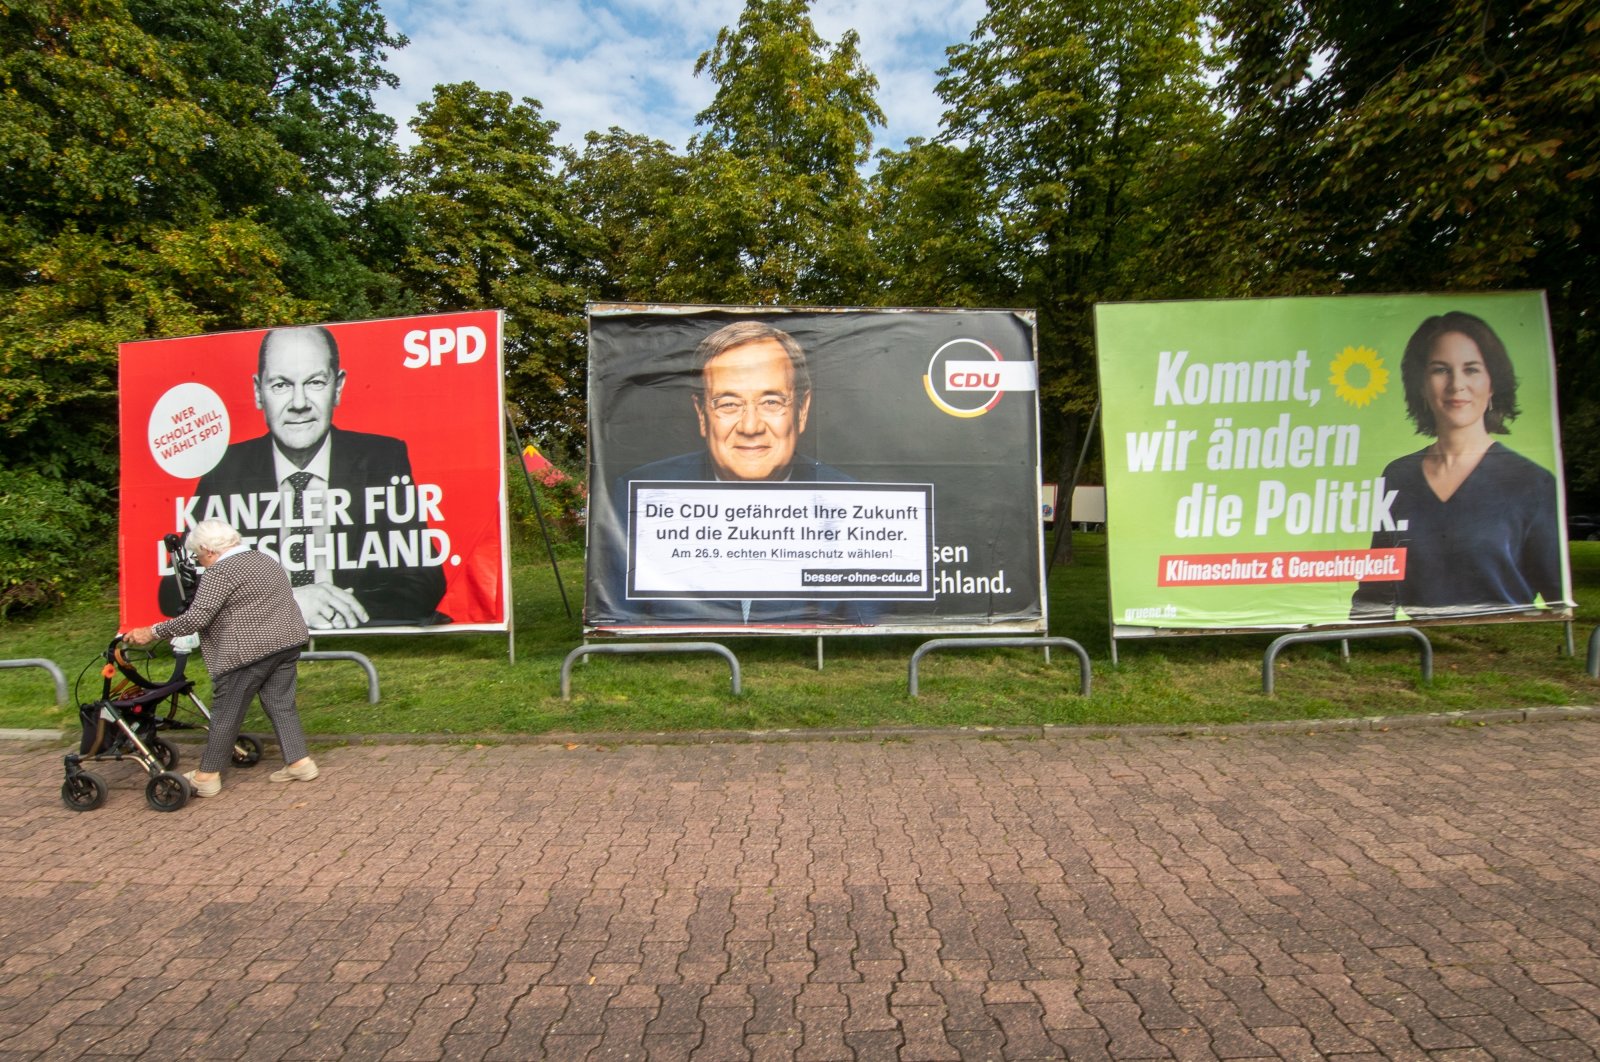 An elderly woman walks past large election placards of the three leading candidates in the German federal elections (L-R) Olaf Scholz of the Social Democratic Party (SPD), Armin Laschet of the Christian Democratic Union (CDU) and Annalena Baerbock of the Green Party (Buendnis 90/Die Gruenen) in Frankfurt am Main, Germany, Sept. 17, 2021. (EPA Photo)